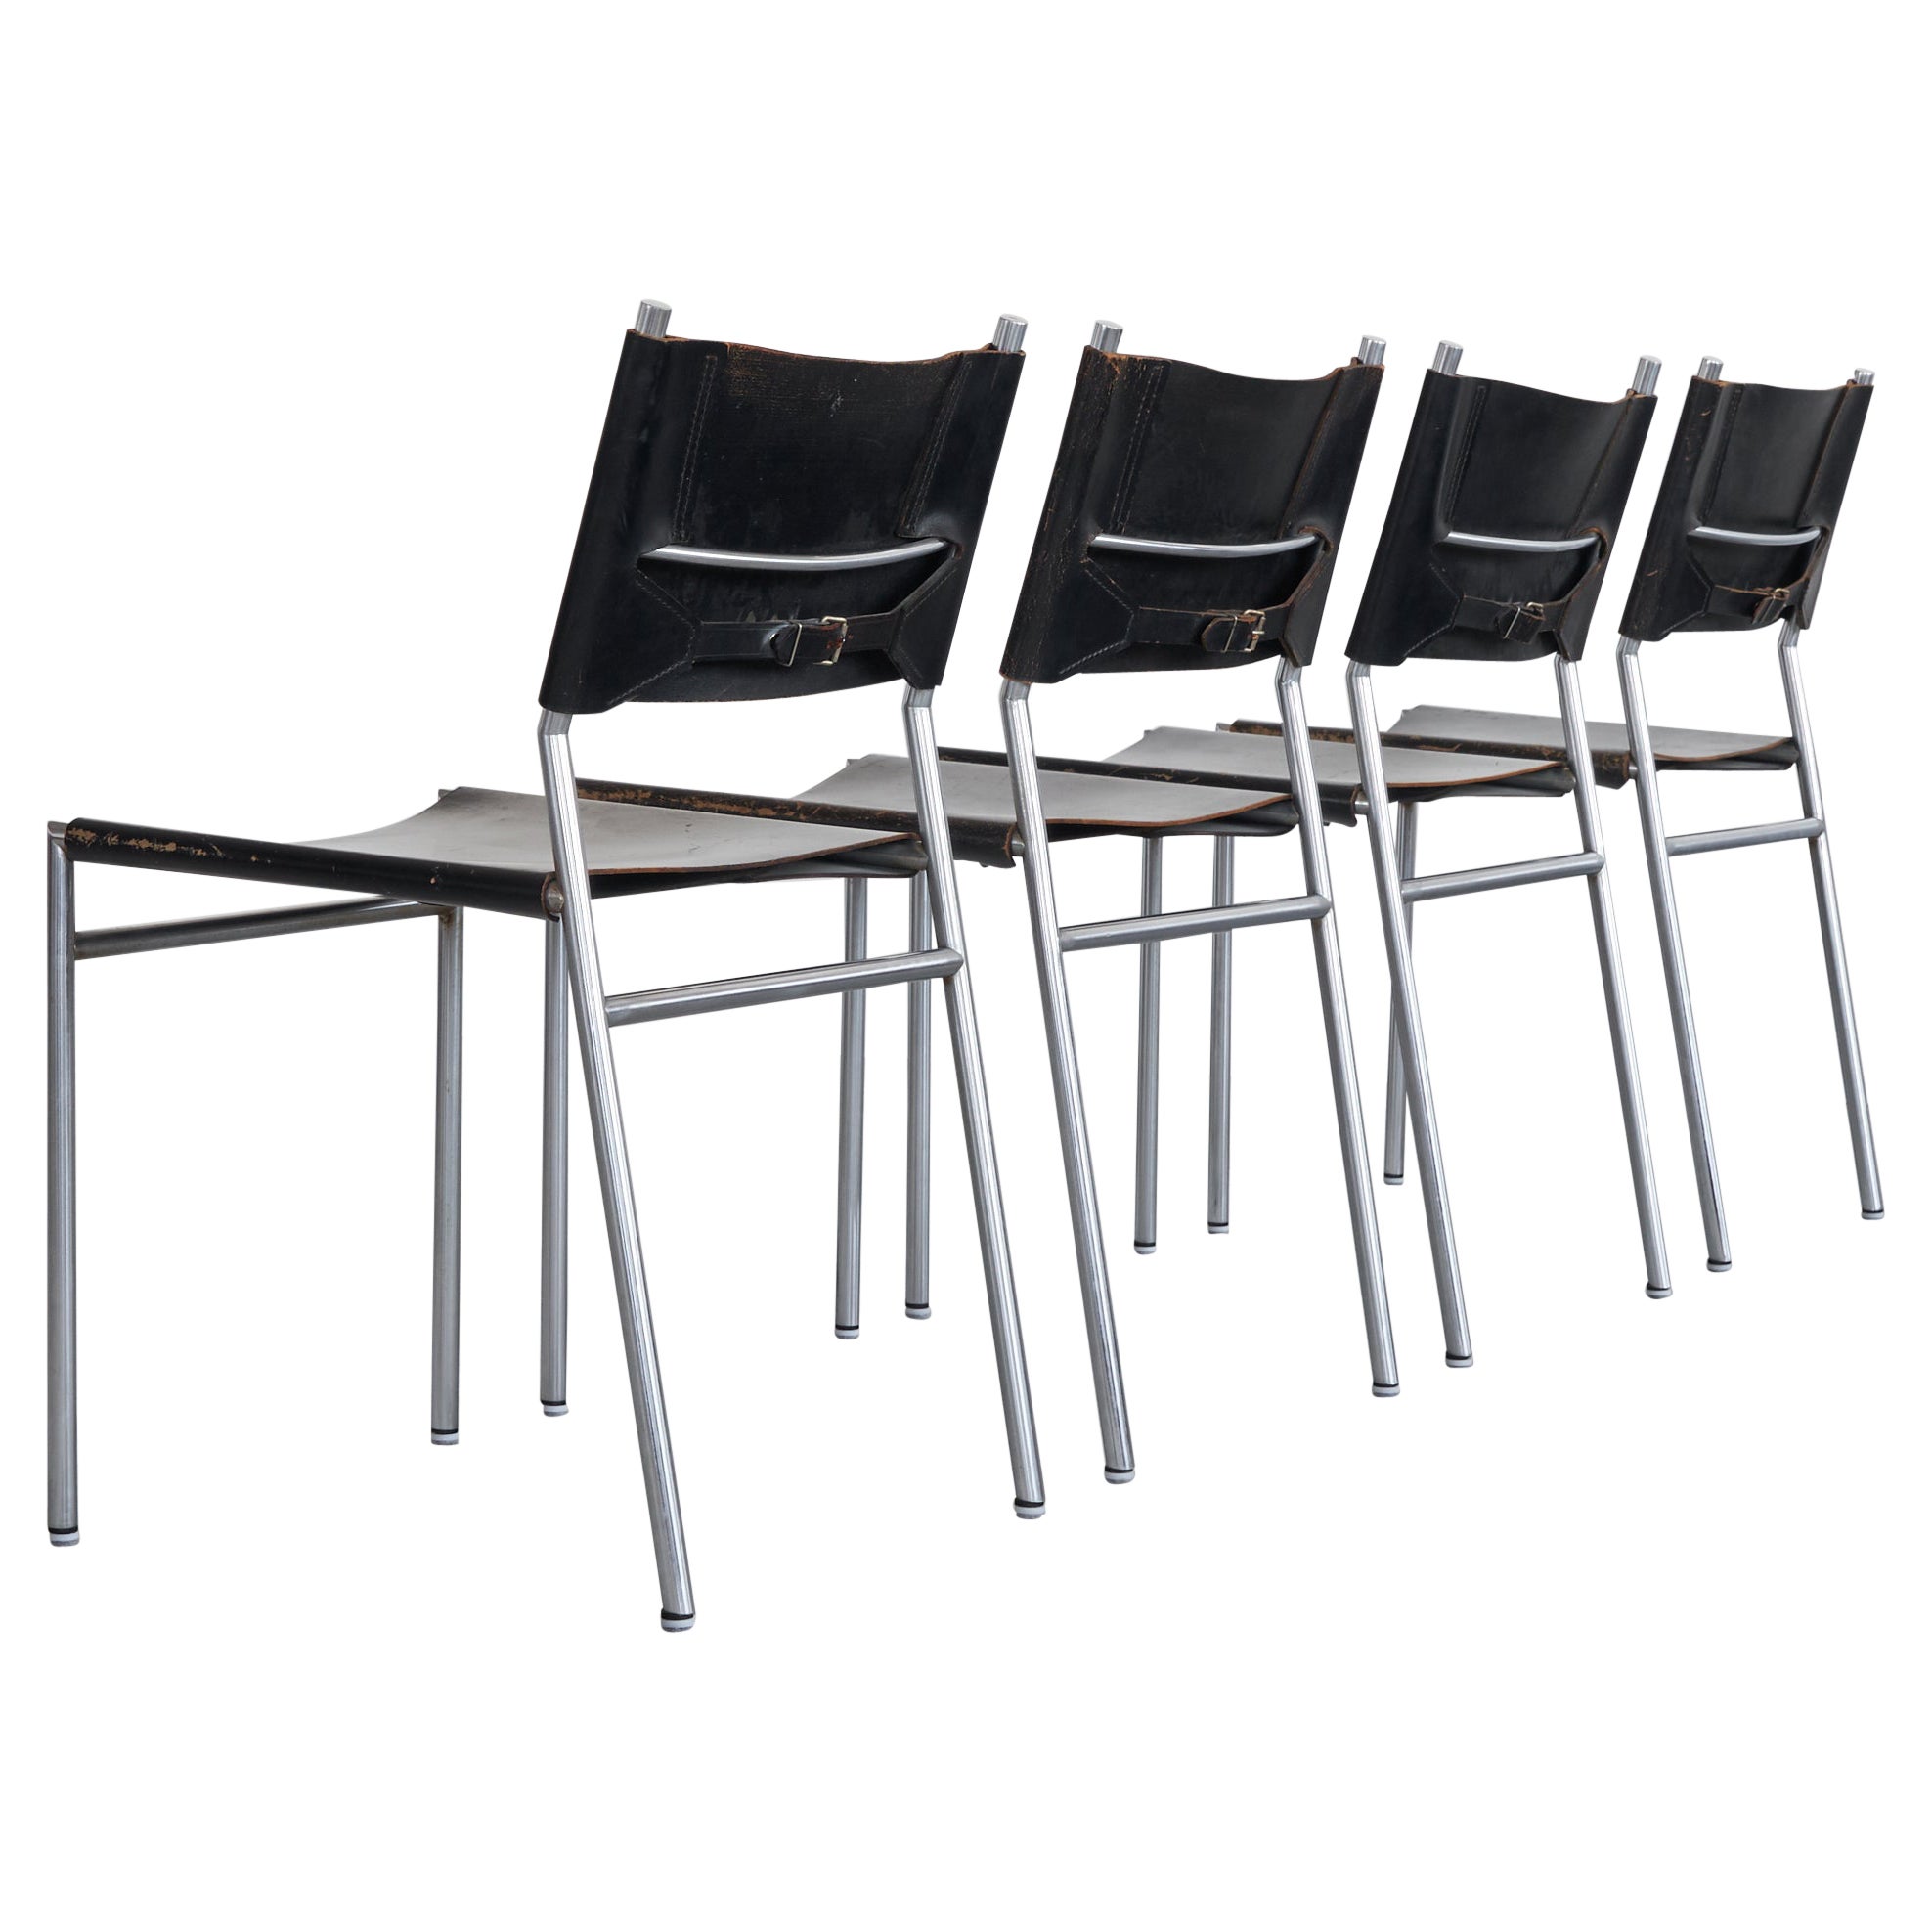 Martin Visser Set of 4 'SE06' Chairs in Patinated Black Leather 1960